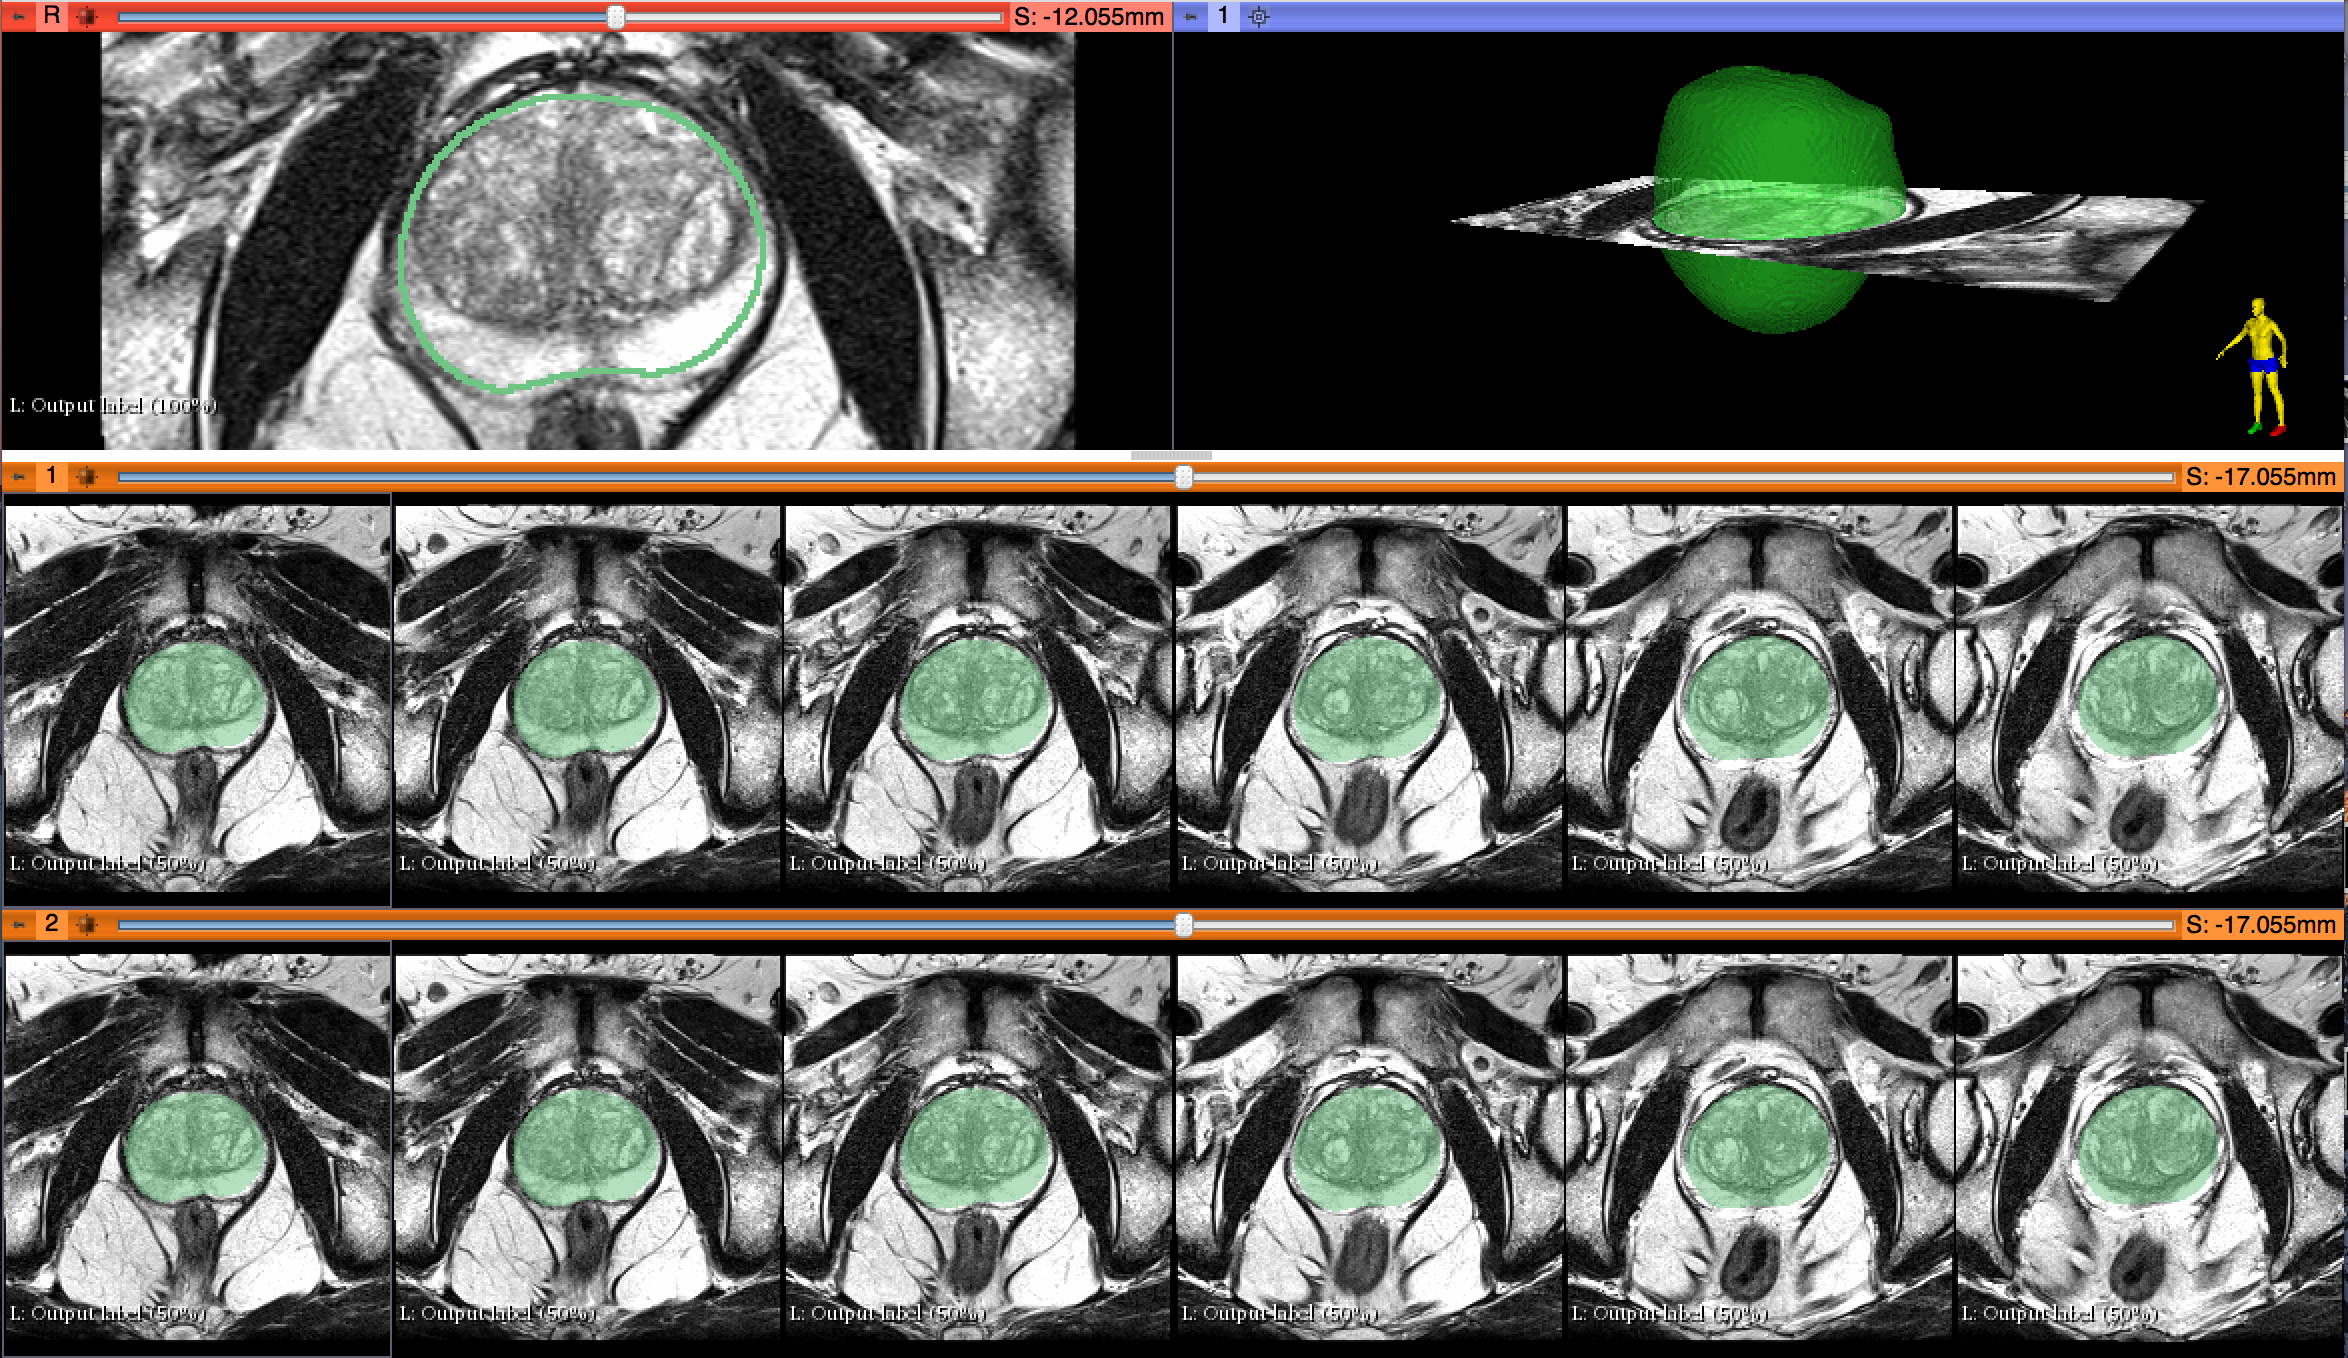 Prostate Volumetirc Measurements in MRI with DeepInfer and 3D Slicer